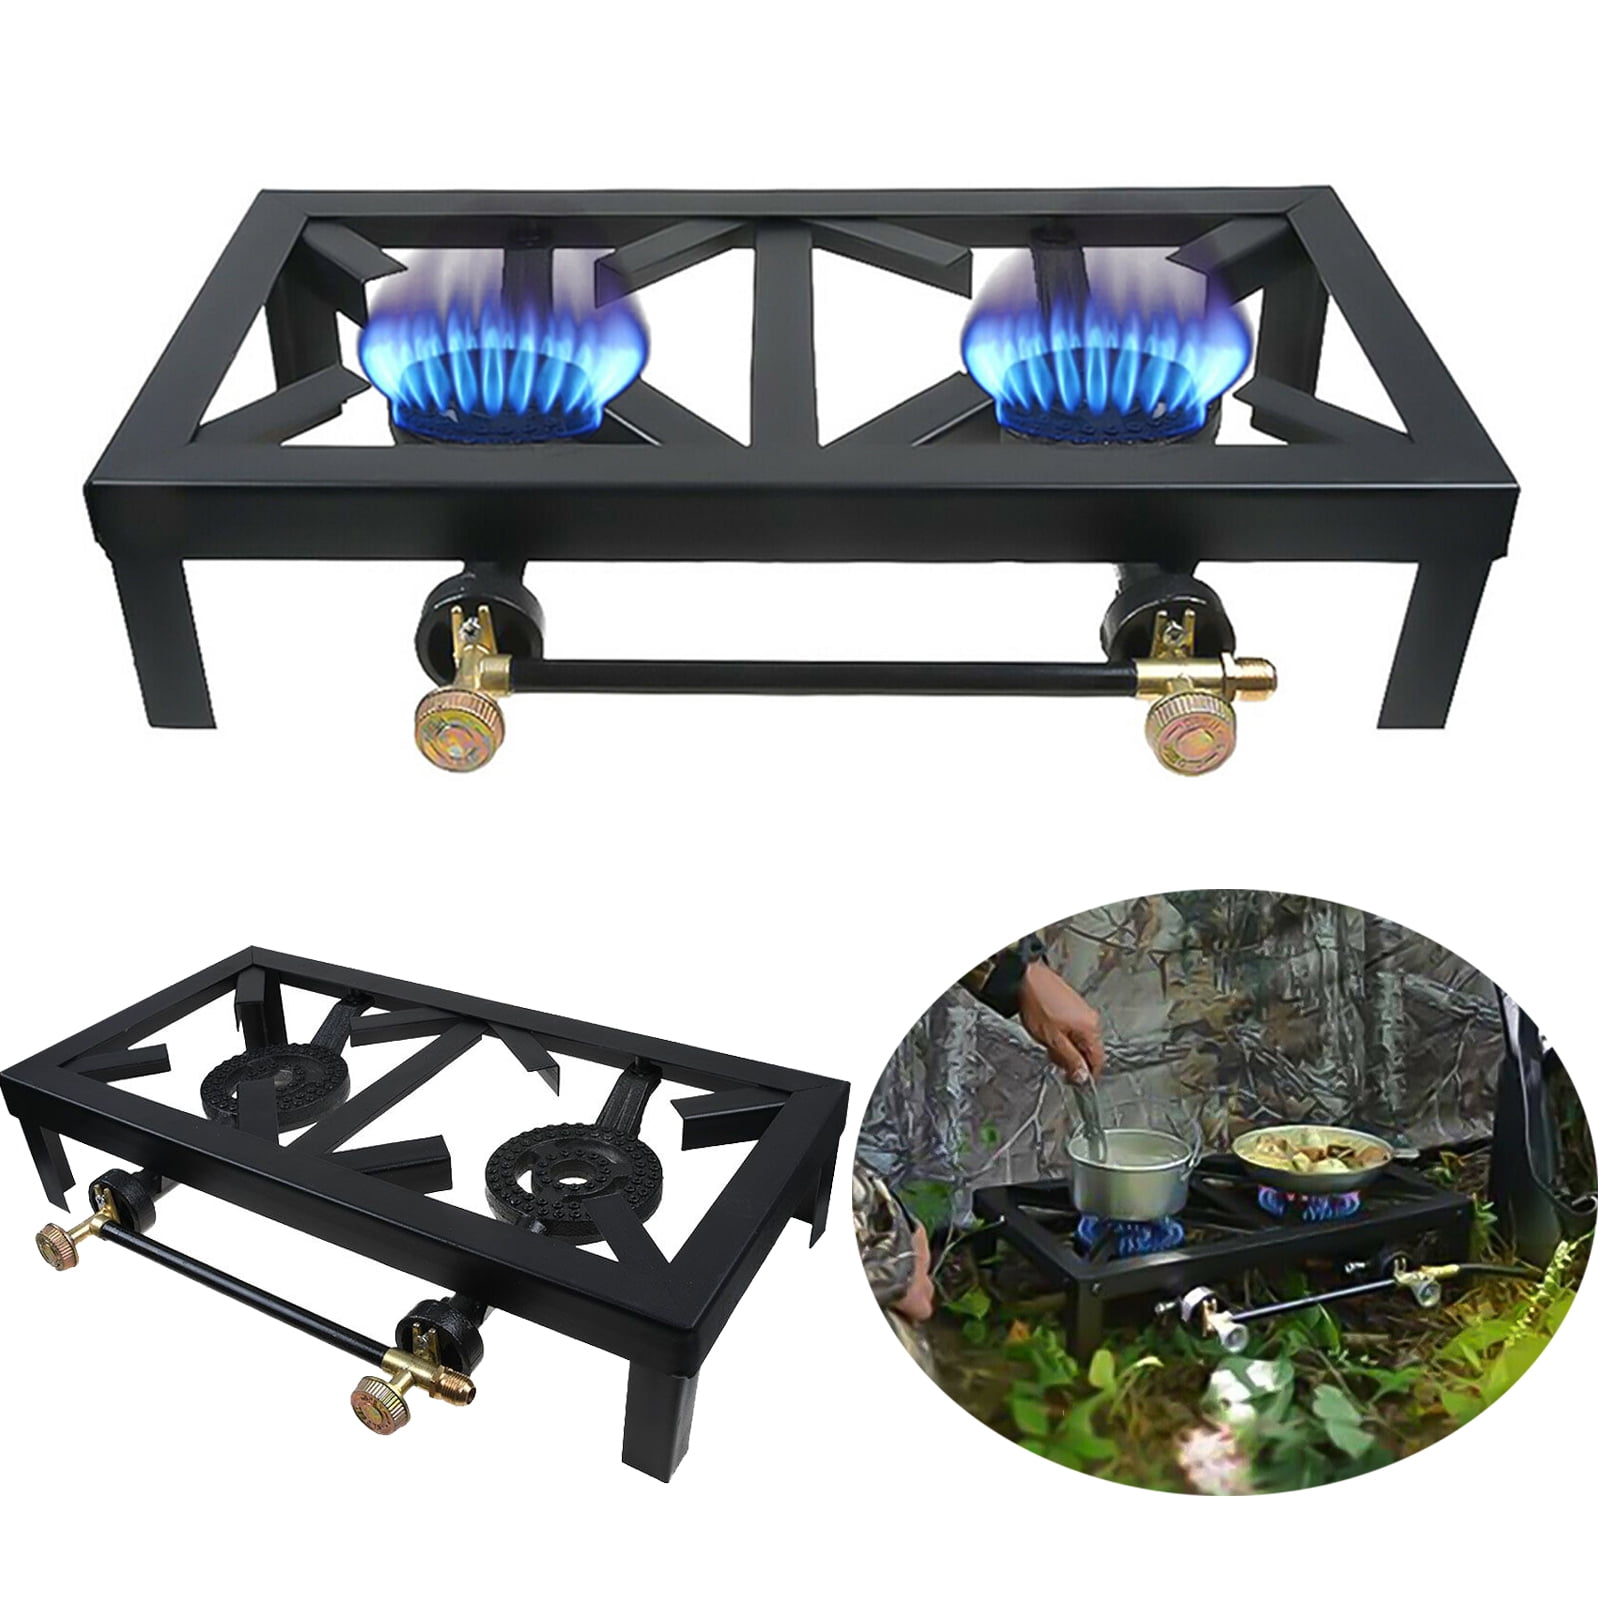 Portable Camping Double/Single Burner Cast Iron Propane Gas Stove BBQ Cooker US 